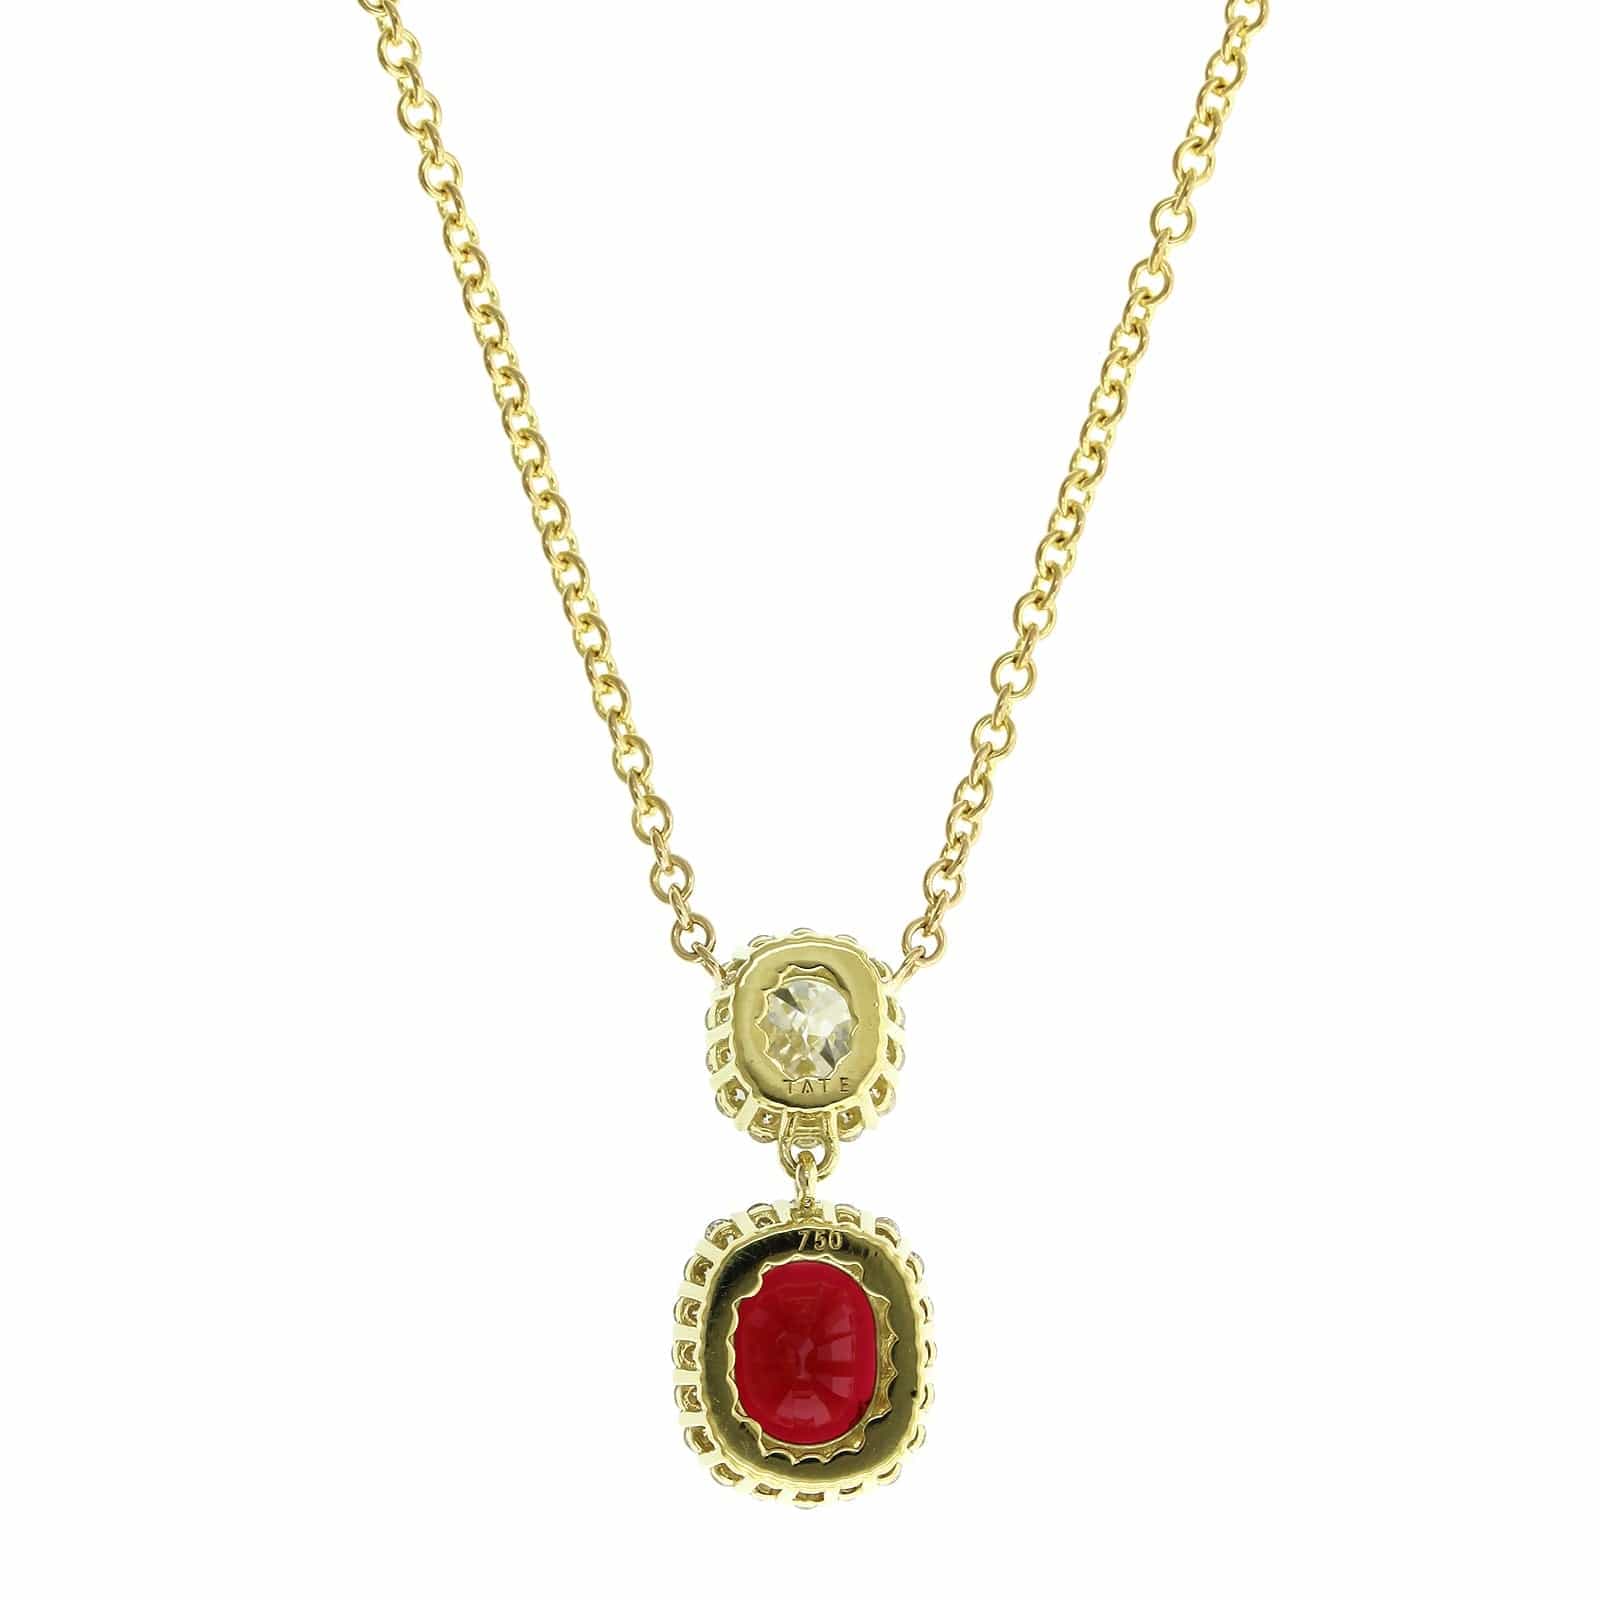 18K Yellow Gold Spinel and Diamond Necklace, 18k yellow gold, Long's Jewelers